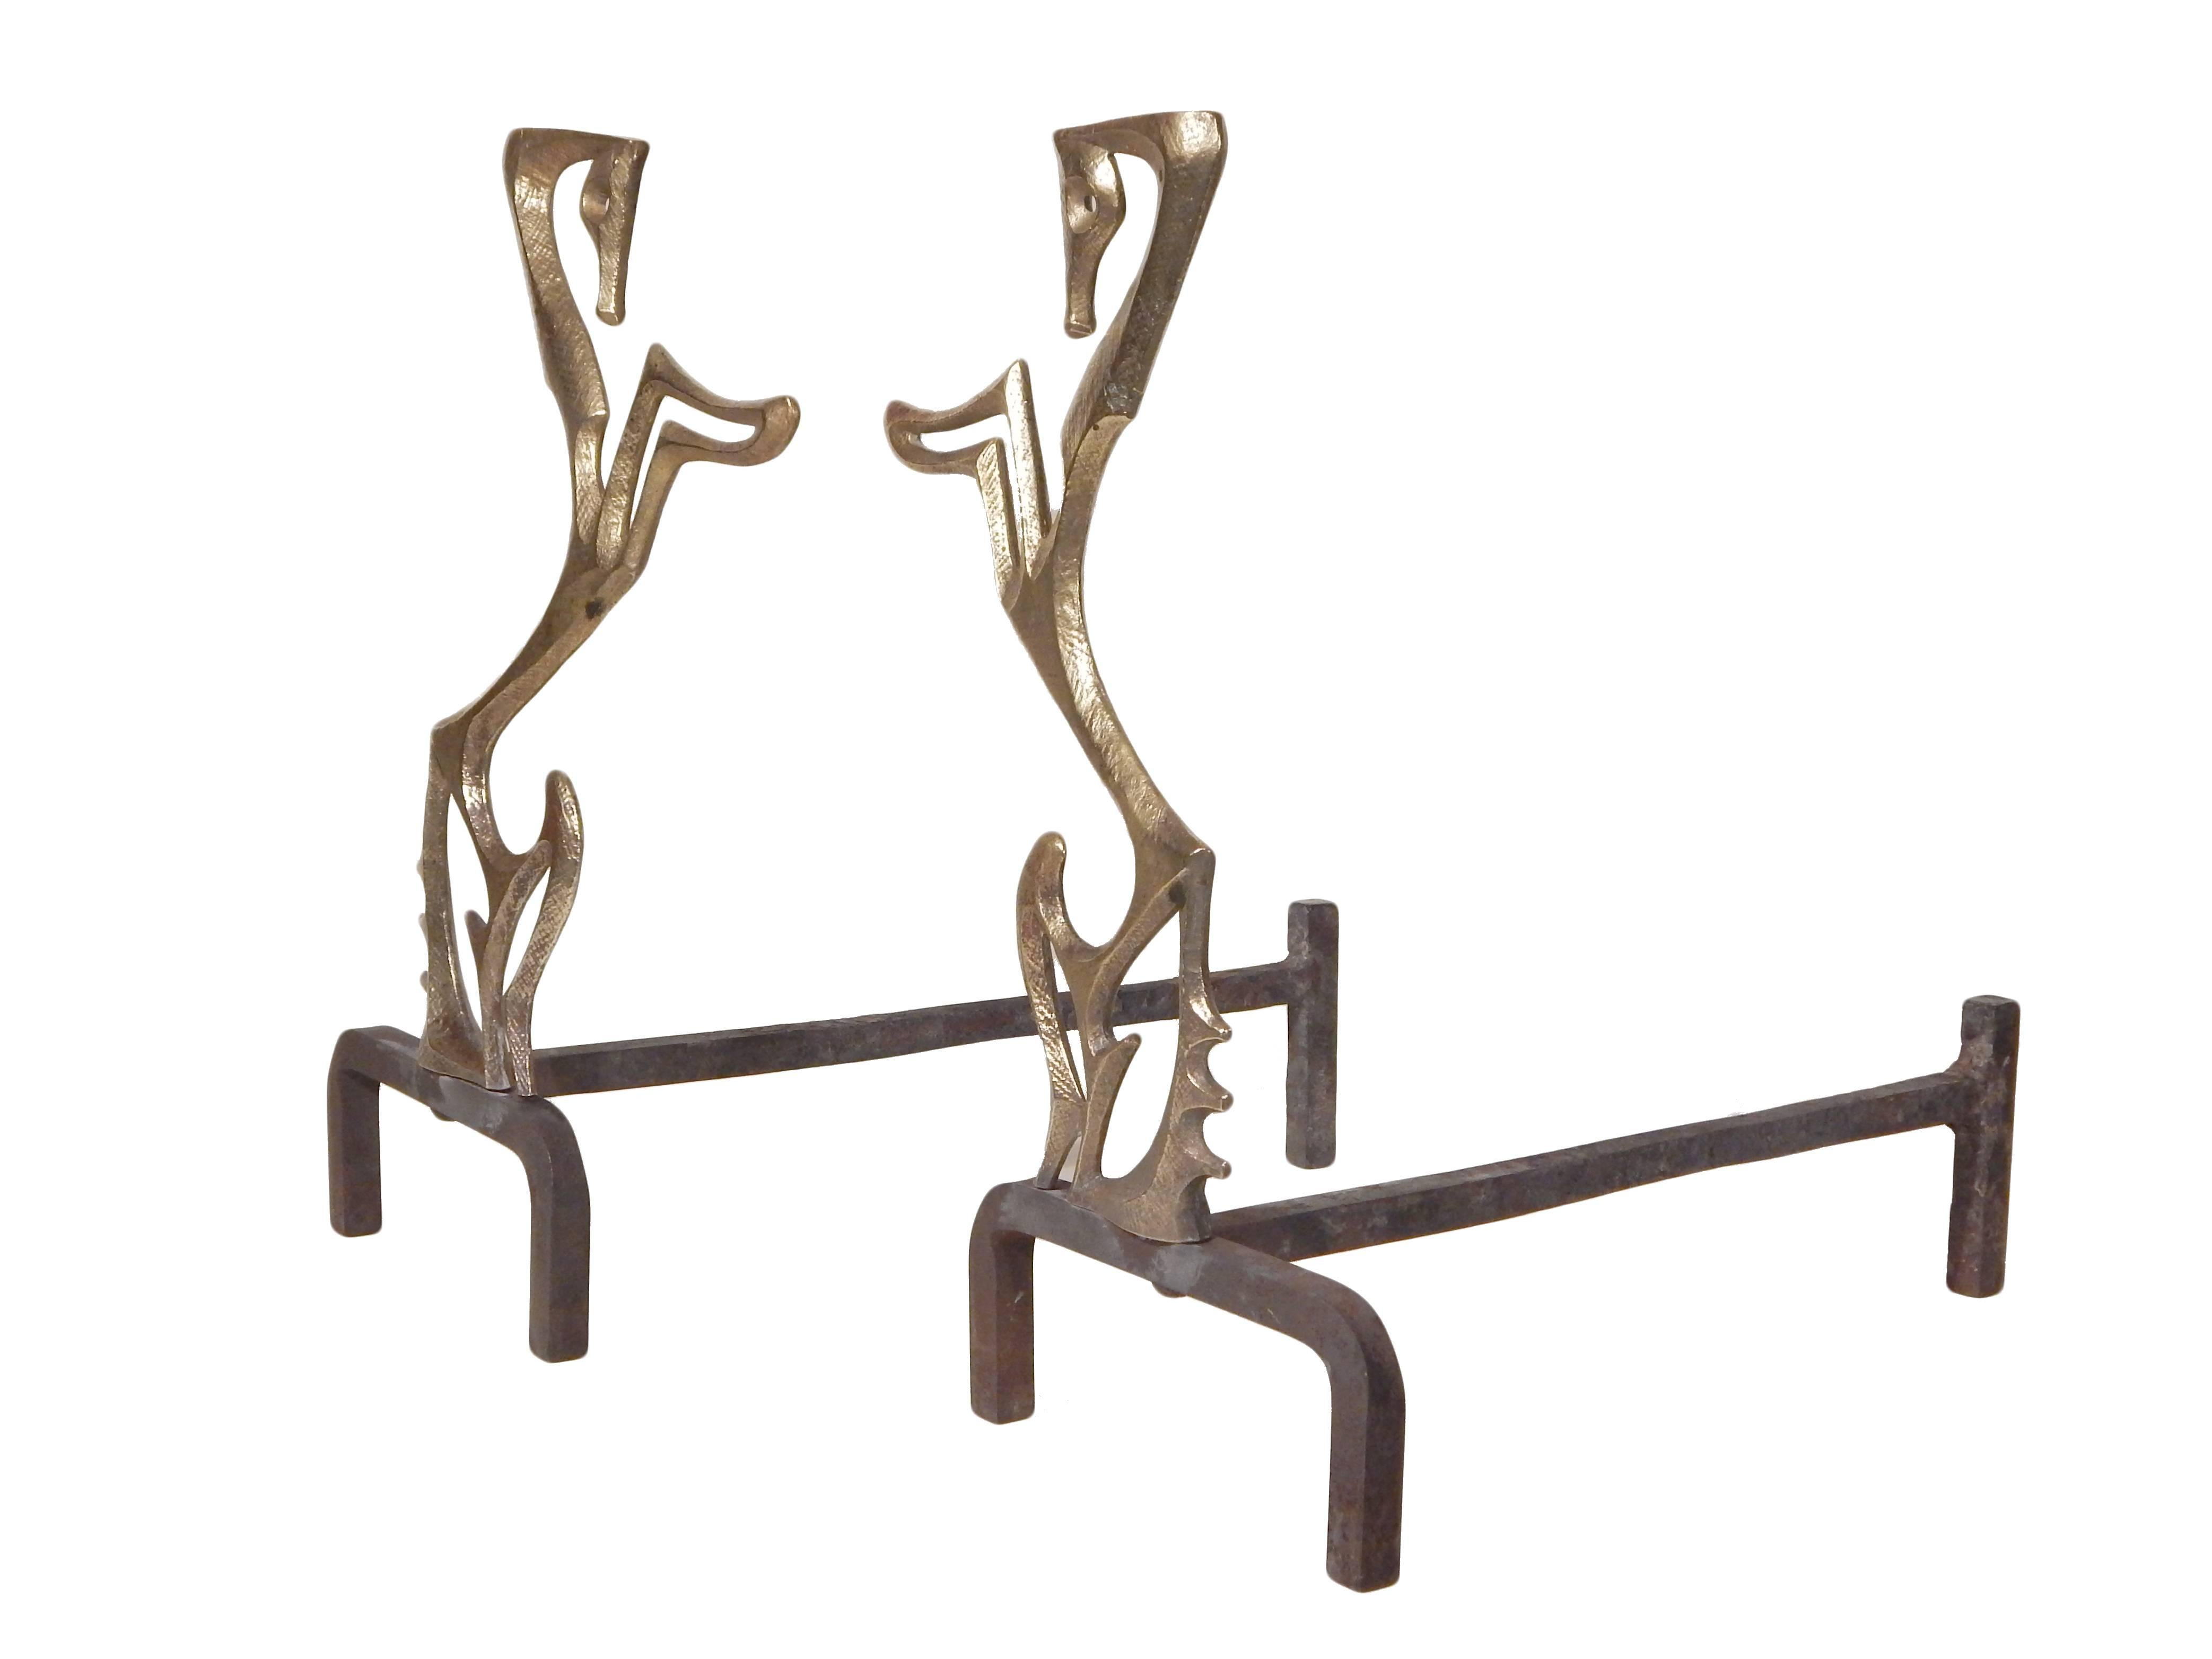 North American Rare Frederick Weinberg Horse Andirons For Sale